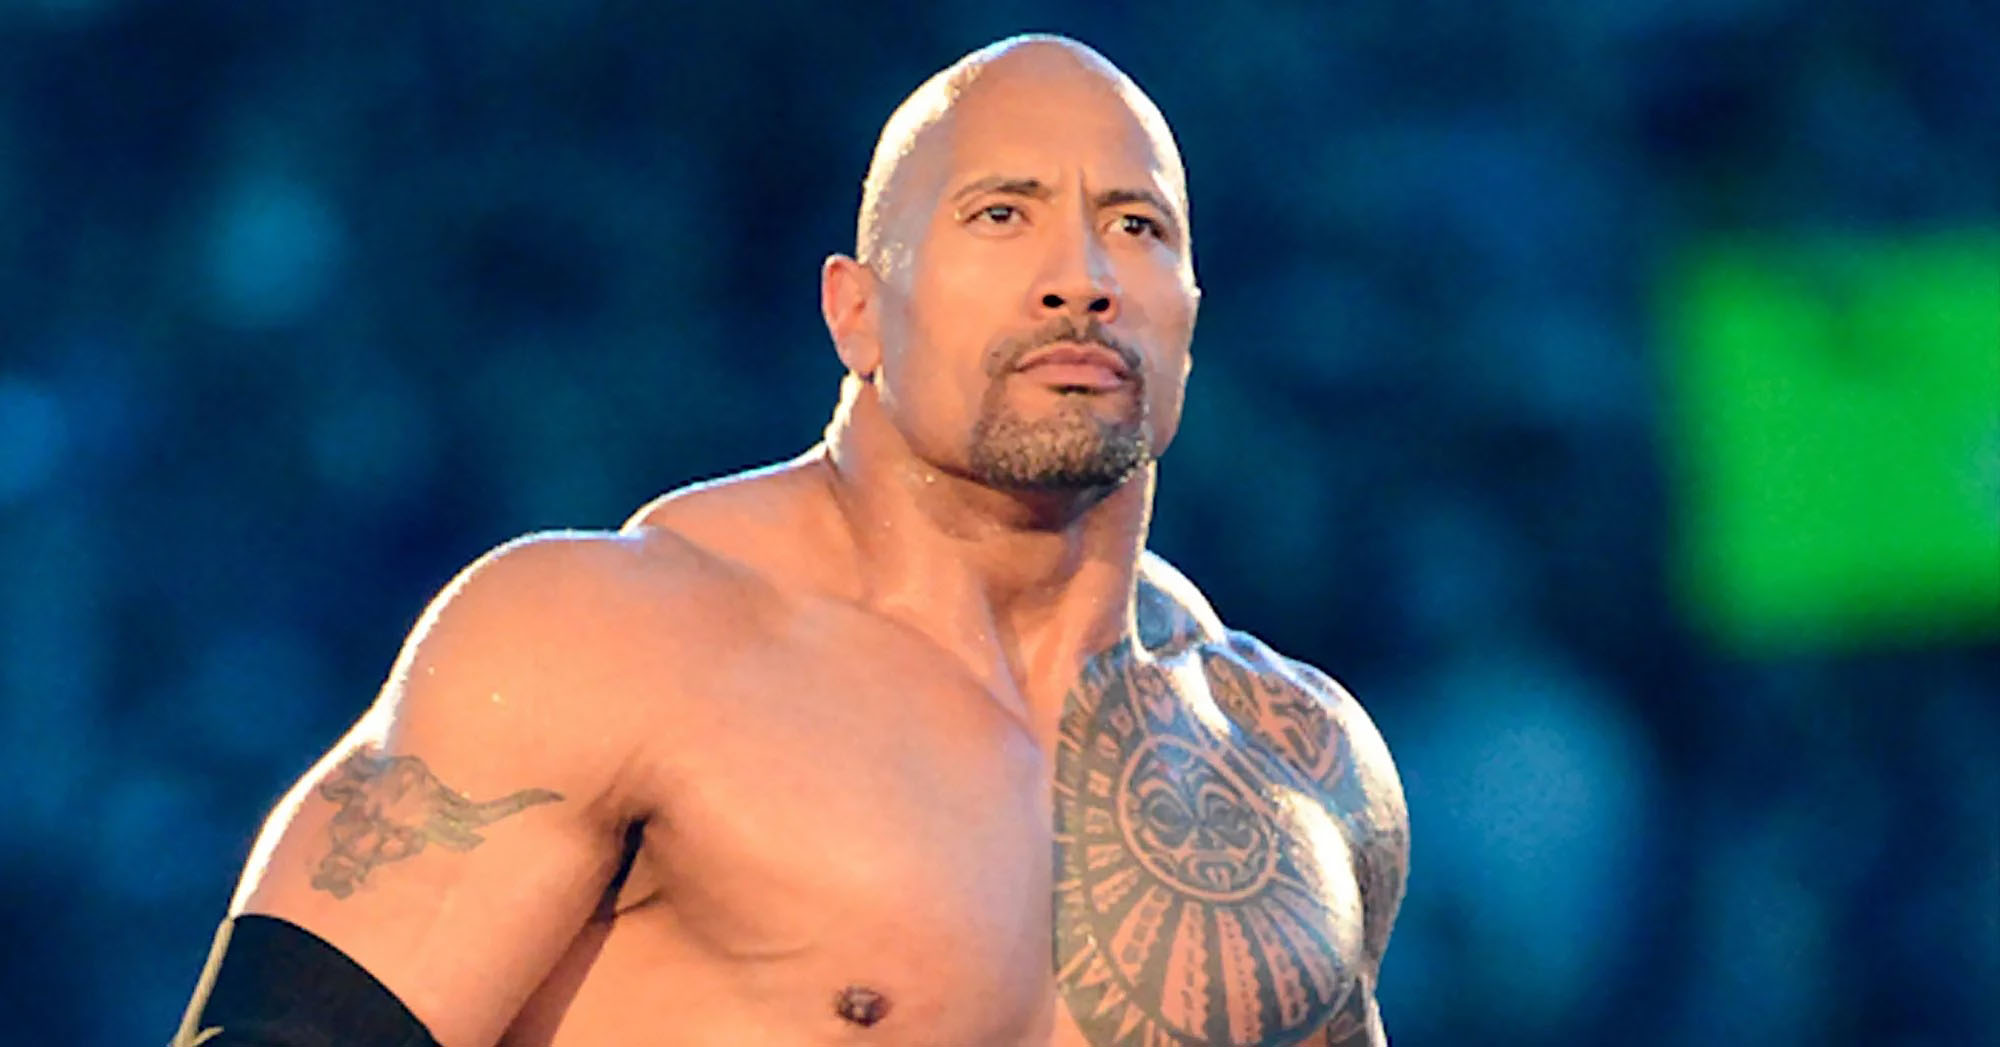 Nude pics of the rock